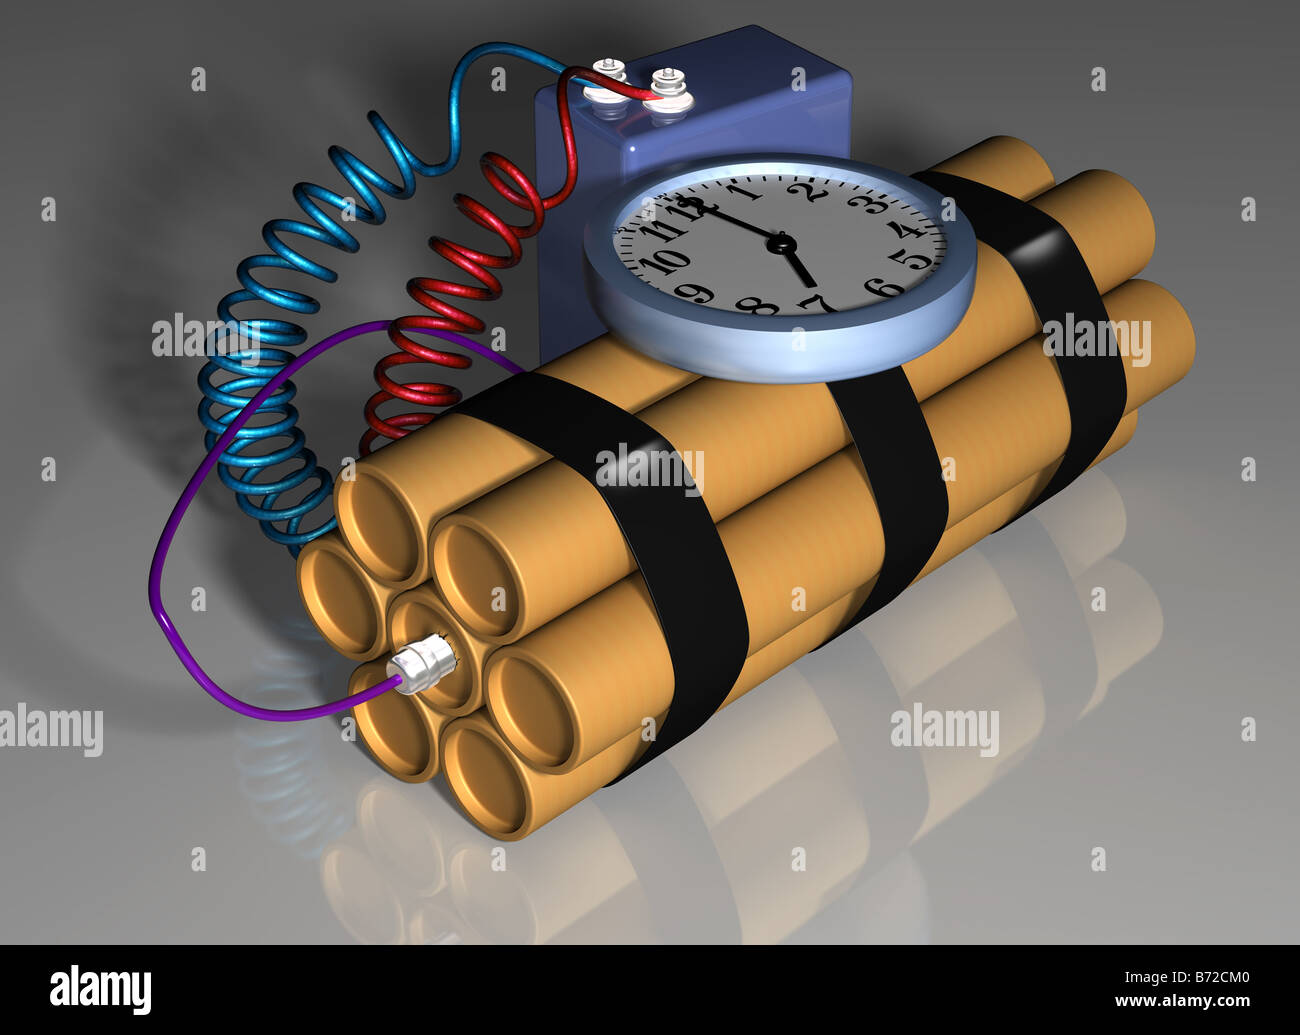 Illustration of a time bomb primed and ready for action Stock Photo